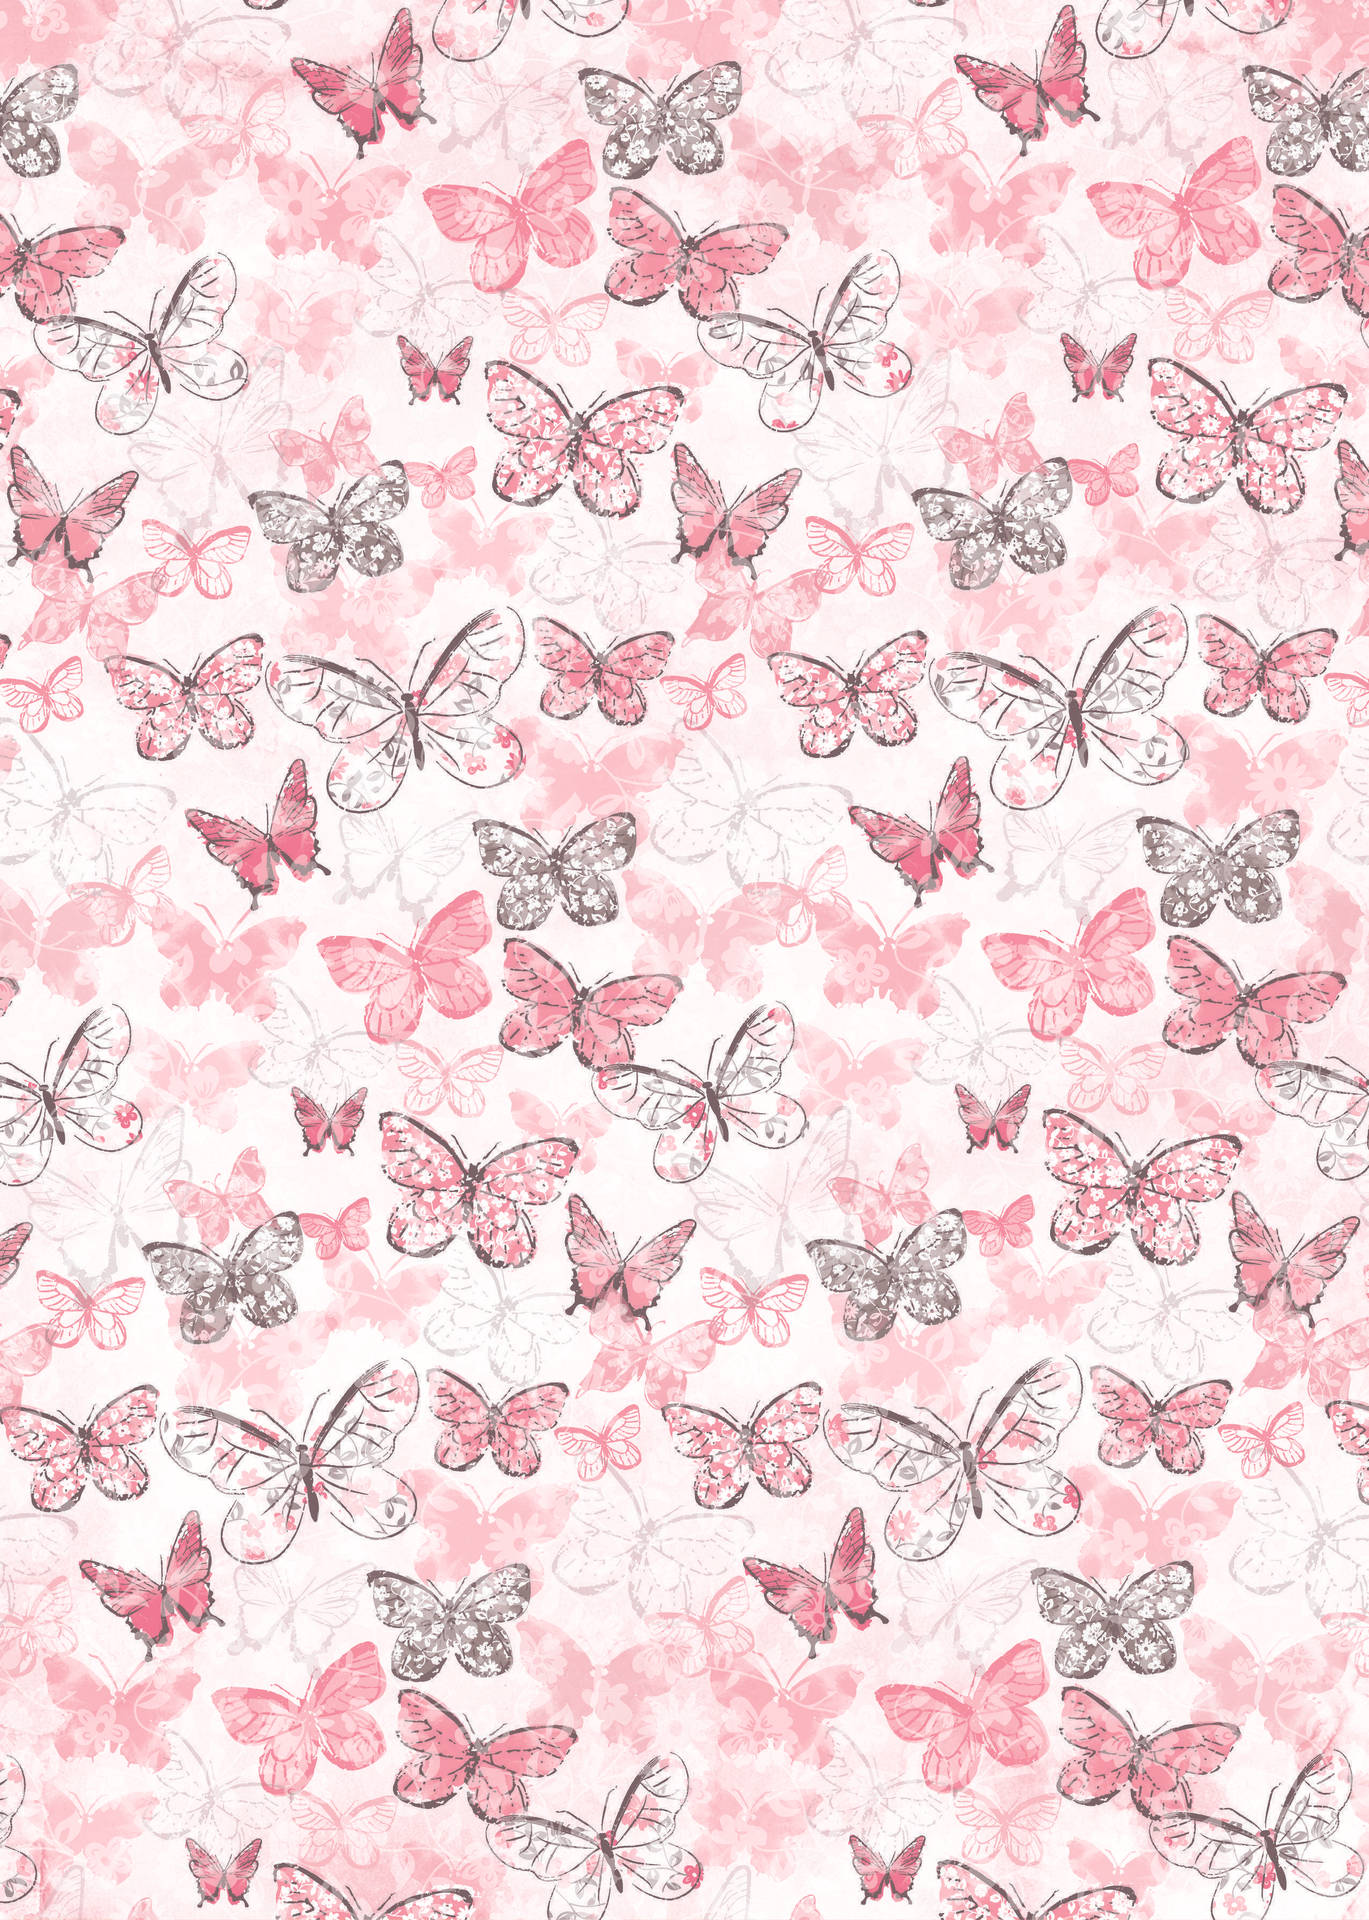 A Kaleidoscope Of Gray And Cute Pink Butterfly Wallpaper